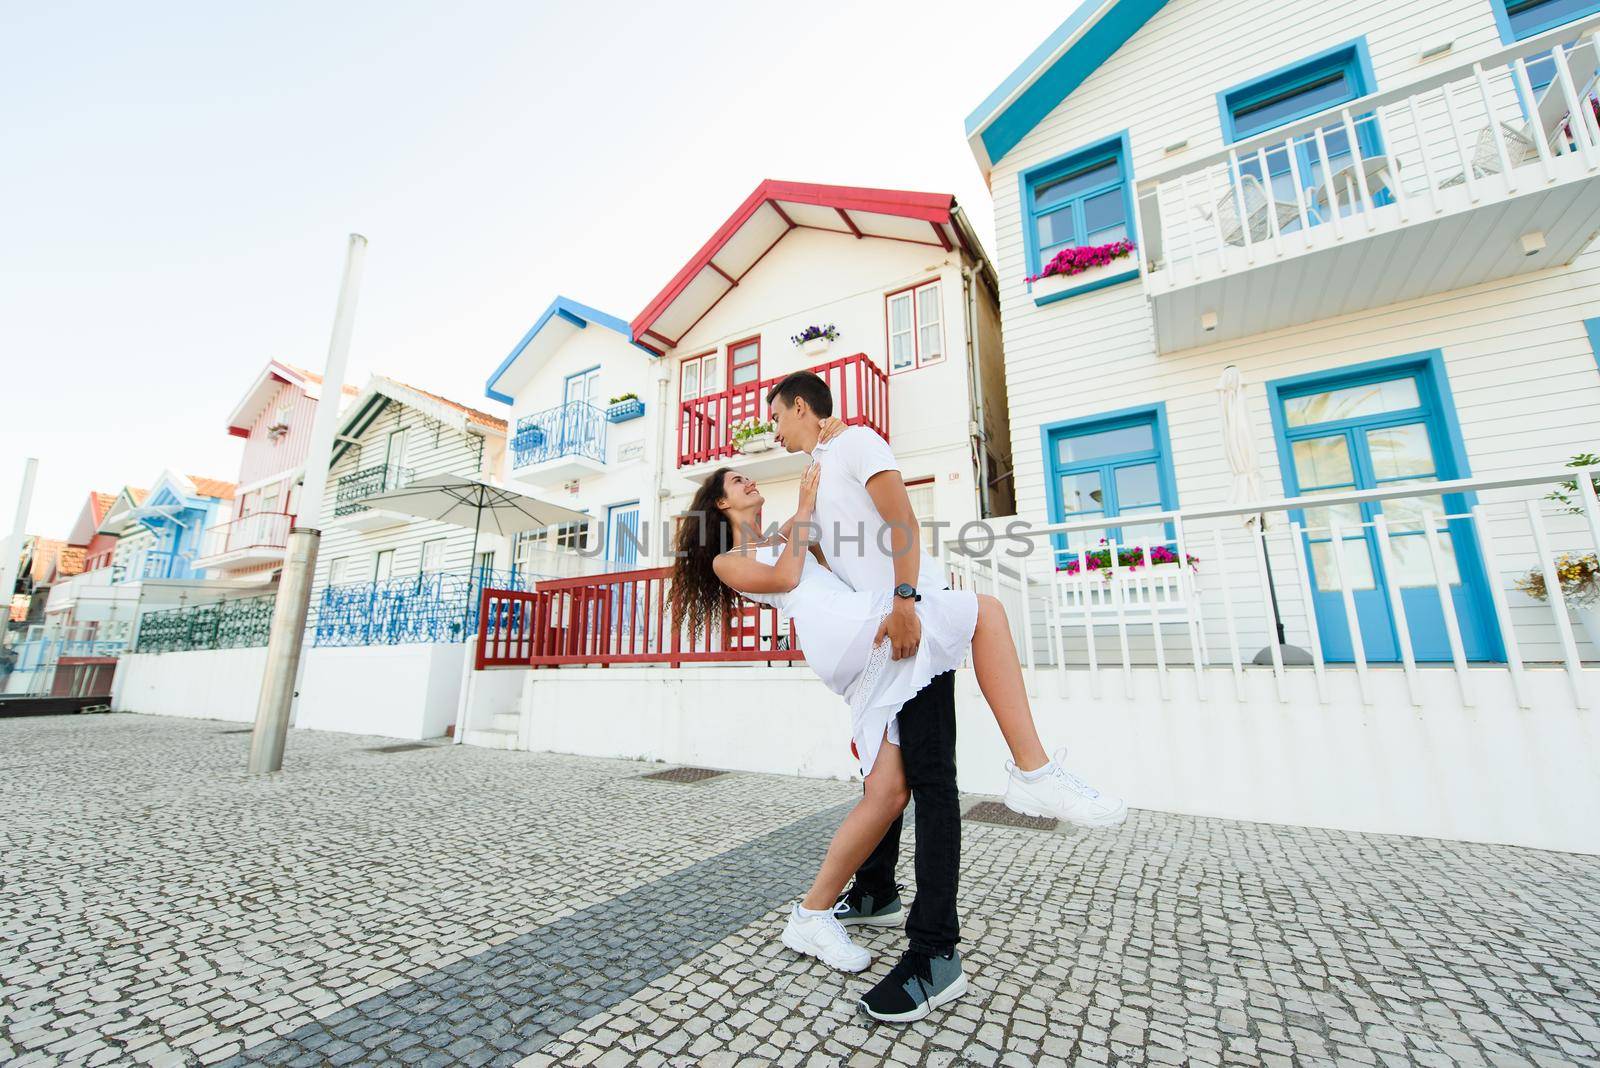 Young couple stays in tango pose and looks each others in Aveiro, Portugal near colourful and peaceful houses. Lifestyle. Having fun, laughs, smiles by Rabizo